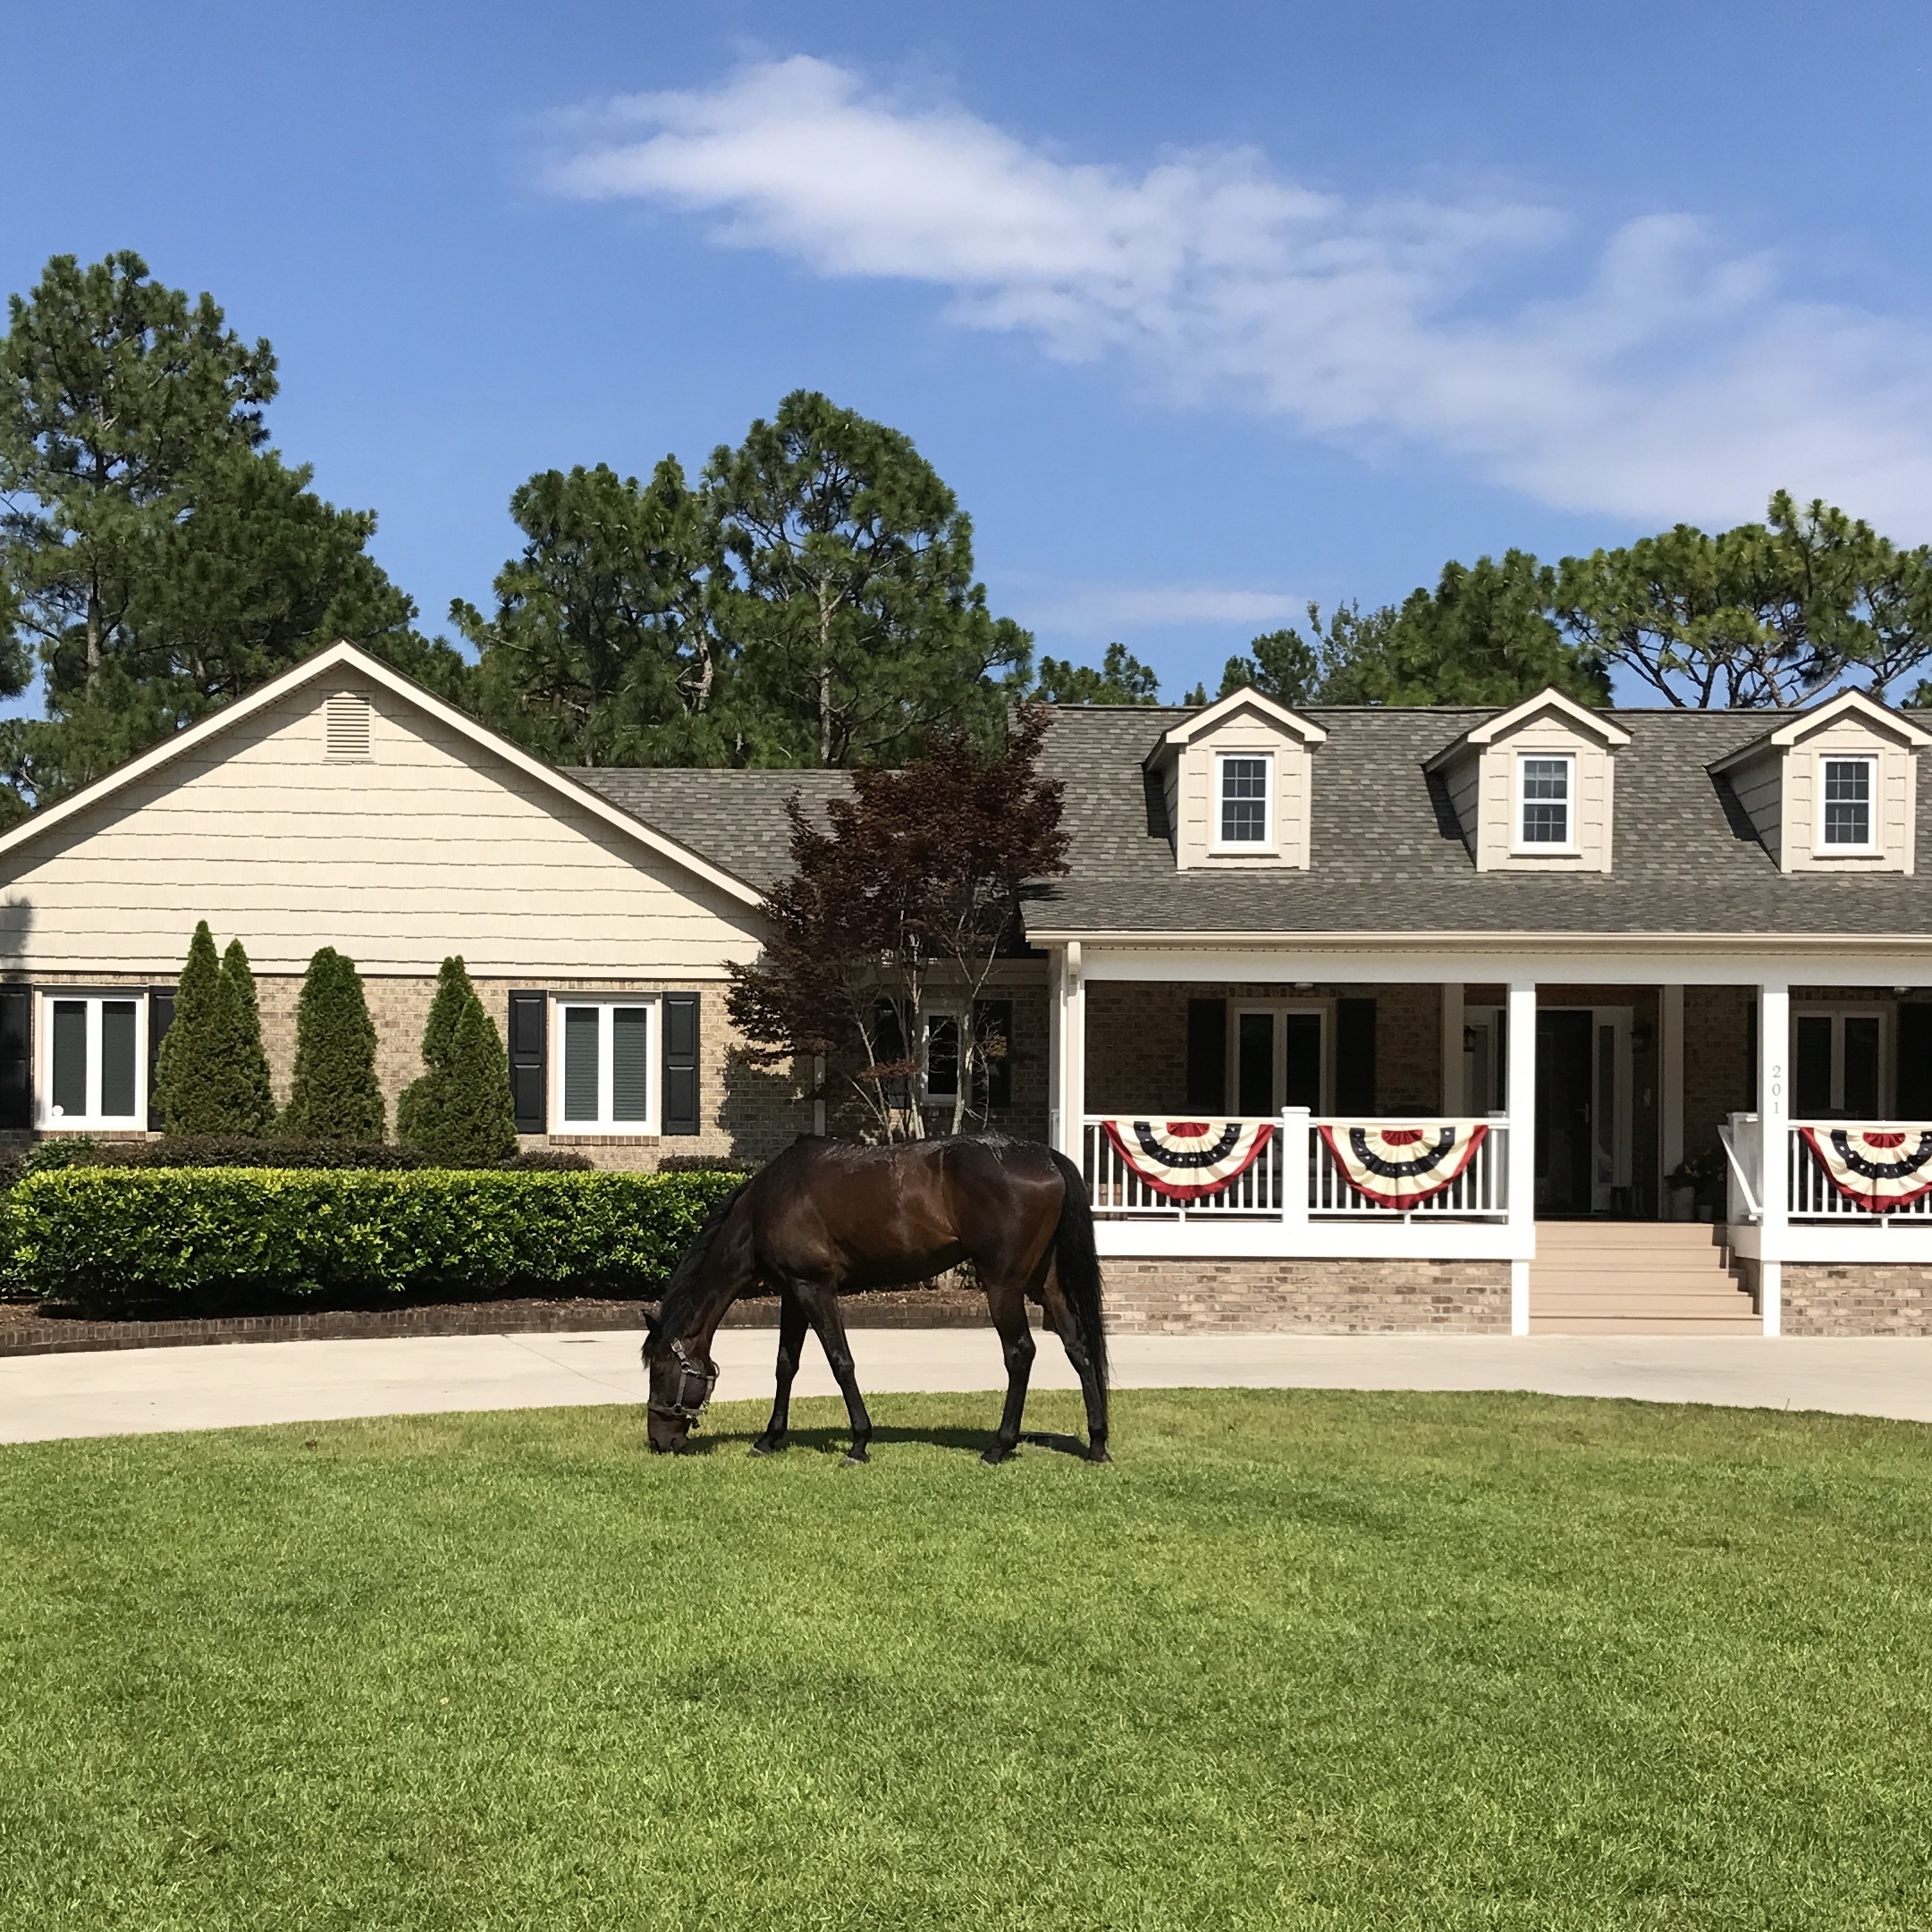 Farmhouse with red, white and blue bunting on the front porch railings and a horse in the front yard.